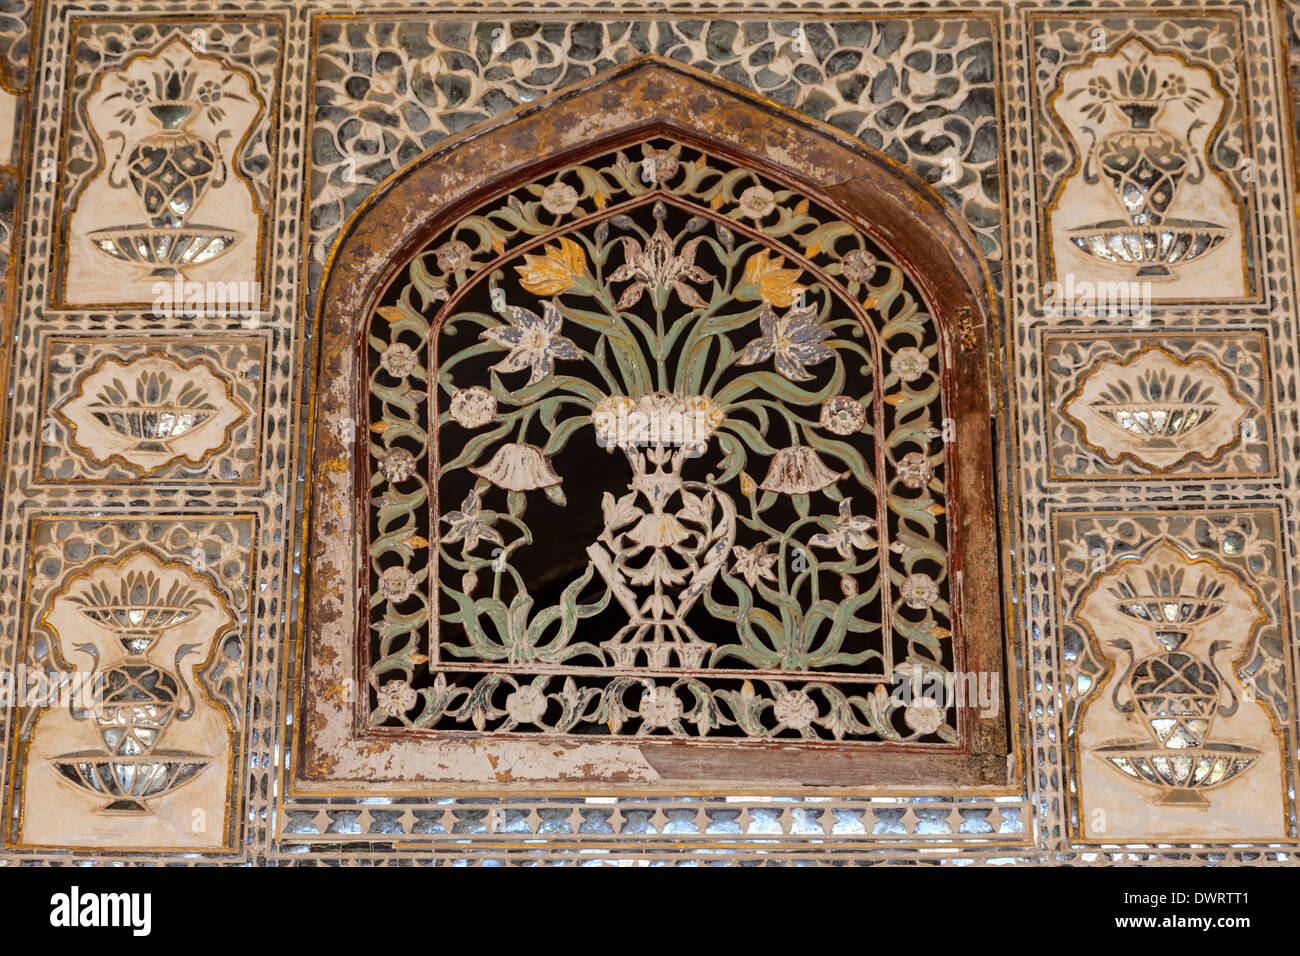 Jaipur, Rajasthan, India. Amber Palace. Decorative Plaster Screen in Wooden Frame in the Sheesh Mahal, or Hall of Mirrors. Stock Photo